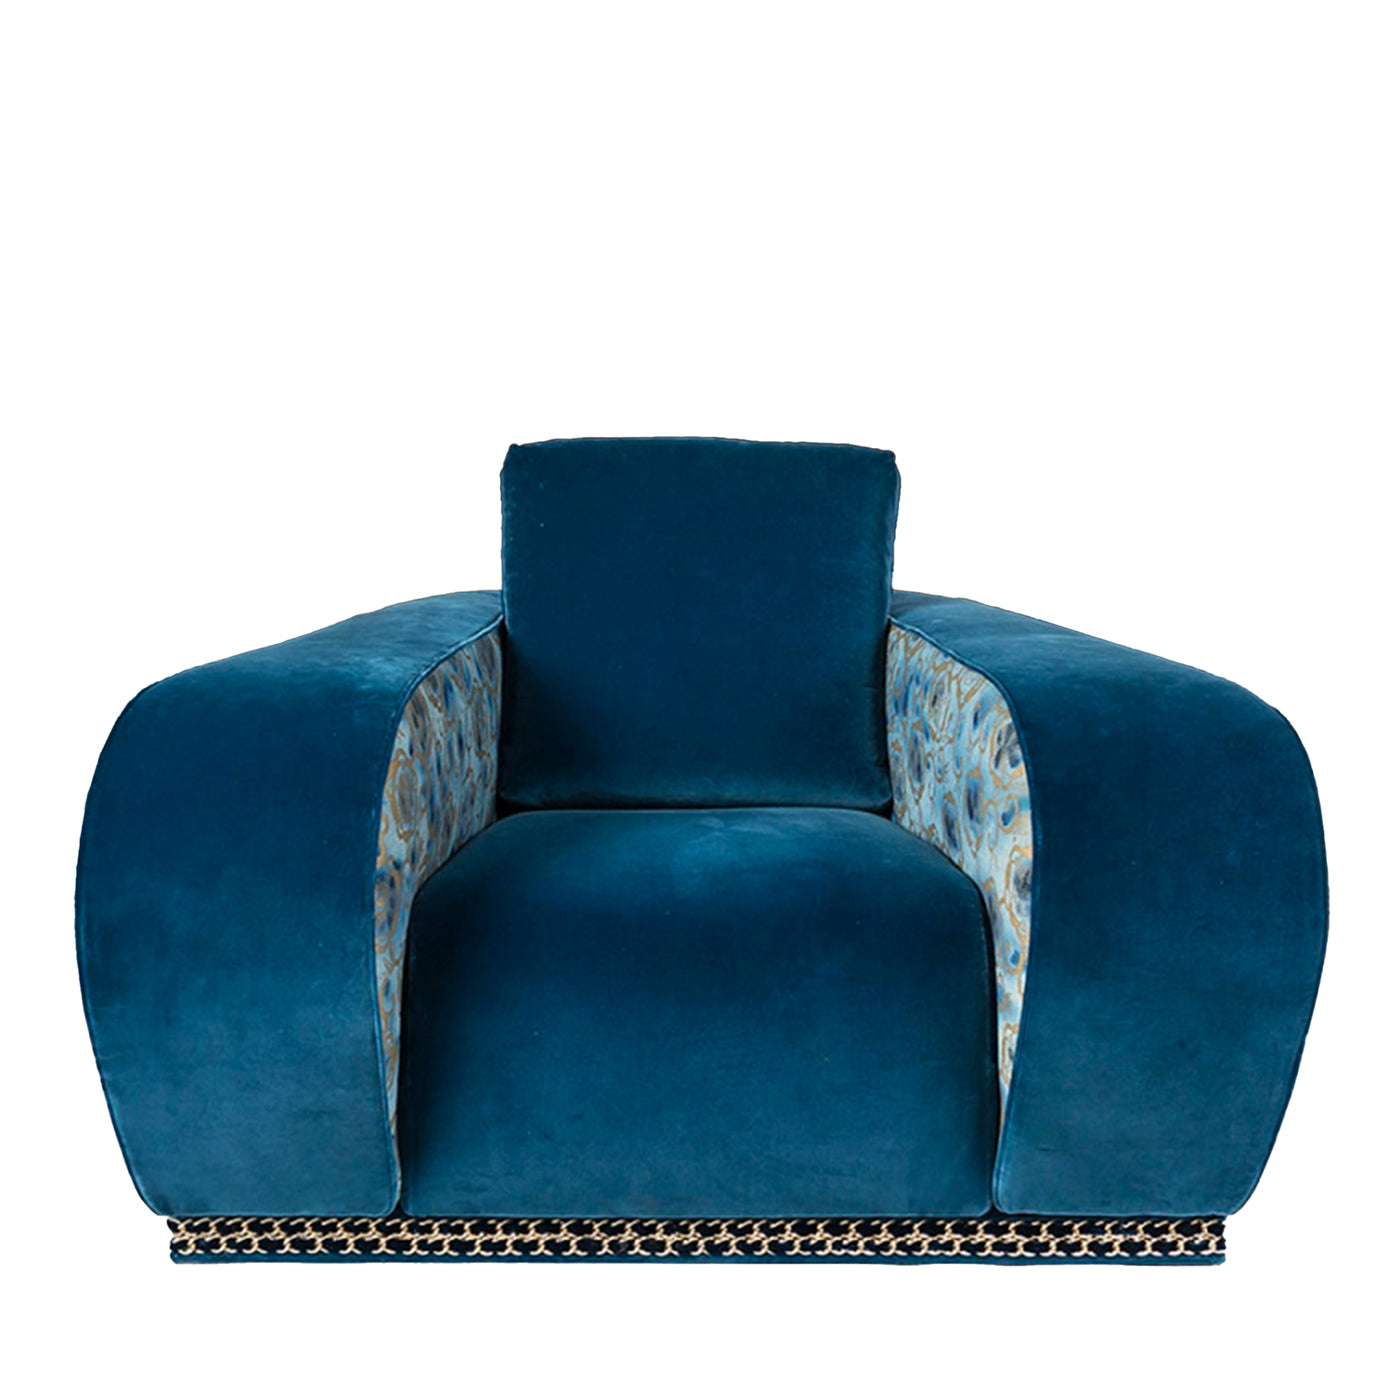 Eticaliving Napoli Armchair - Main view